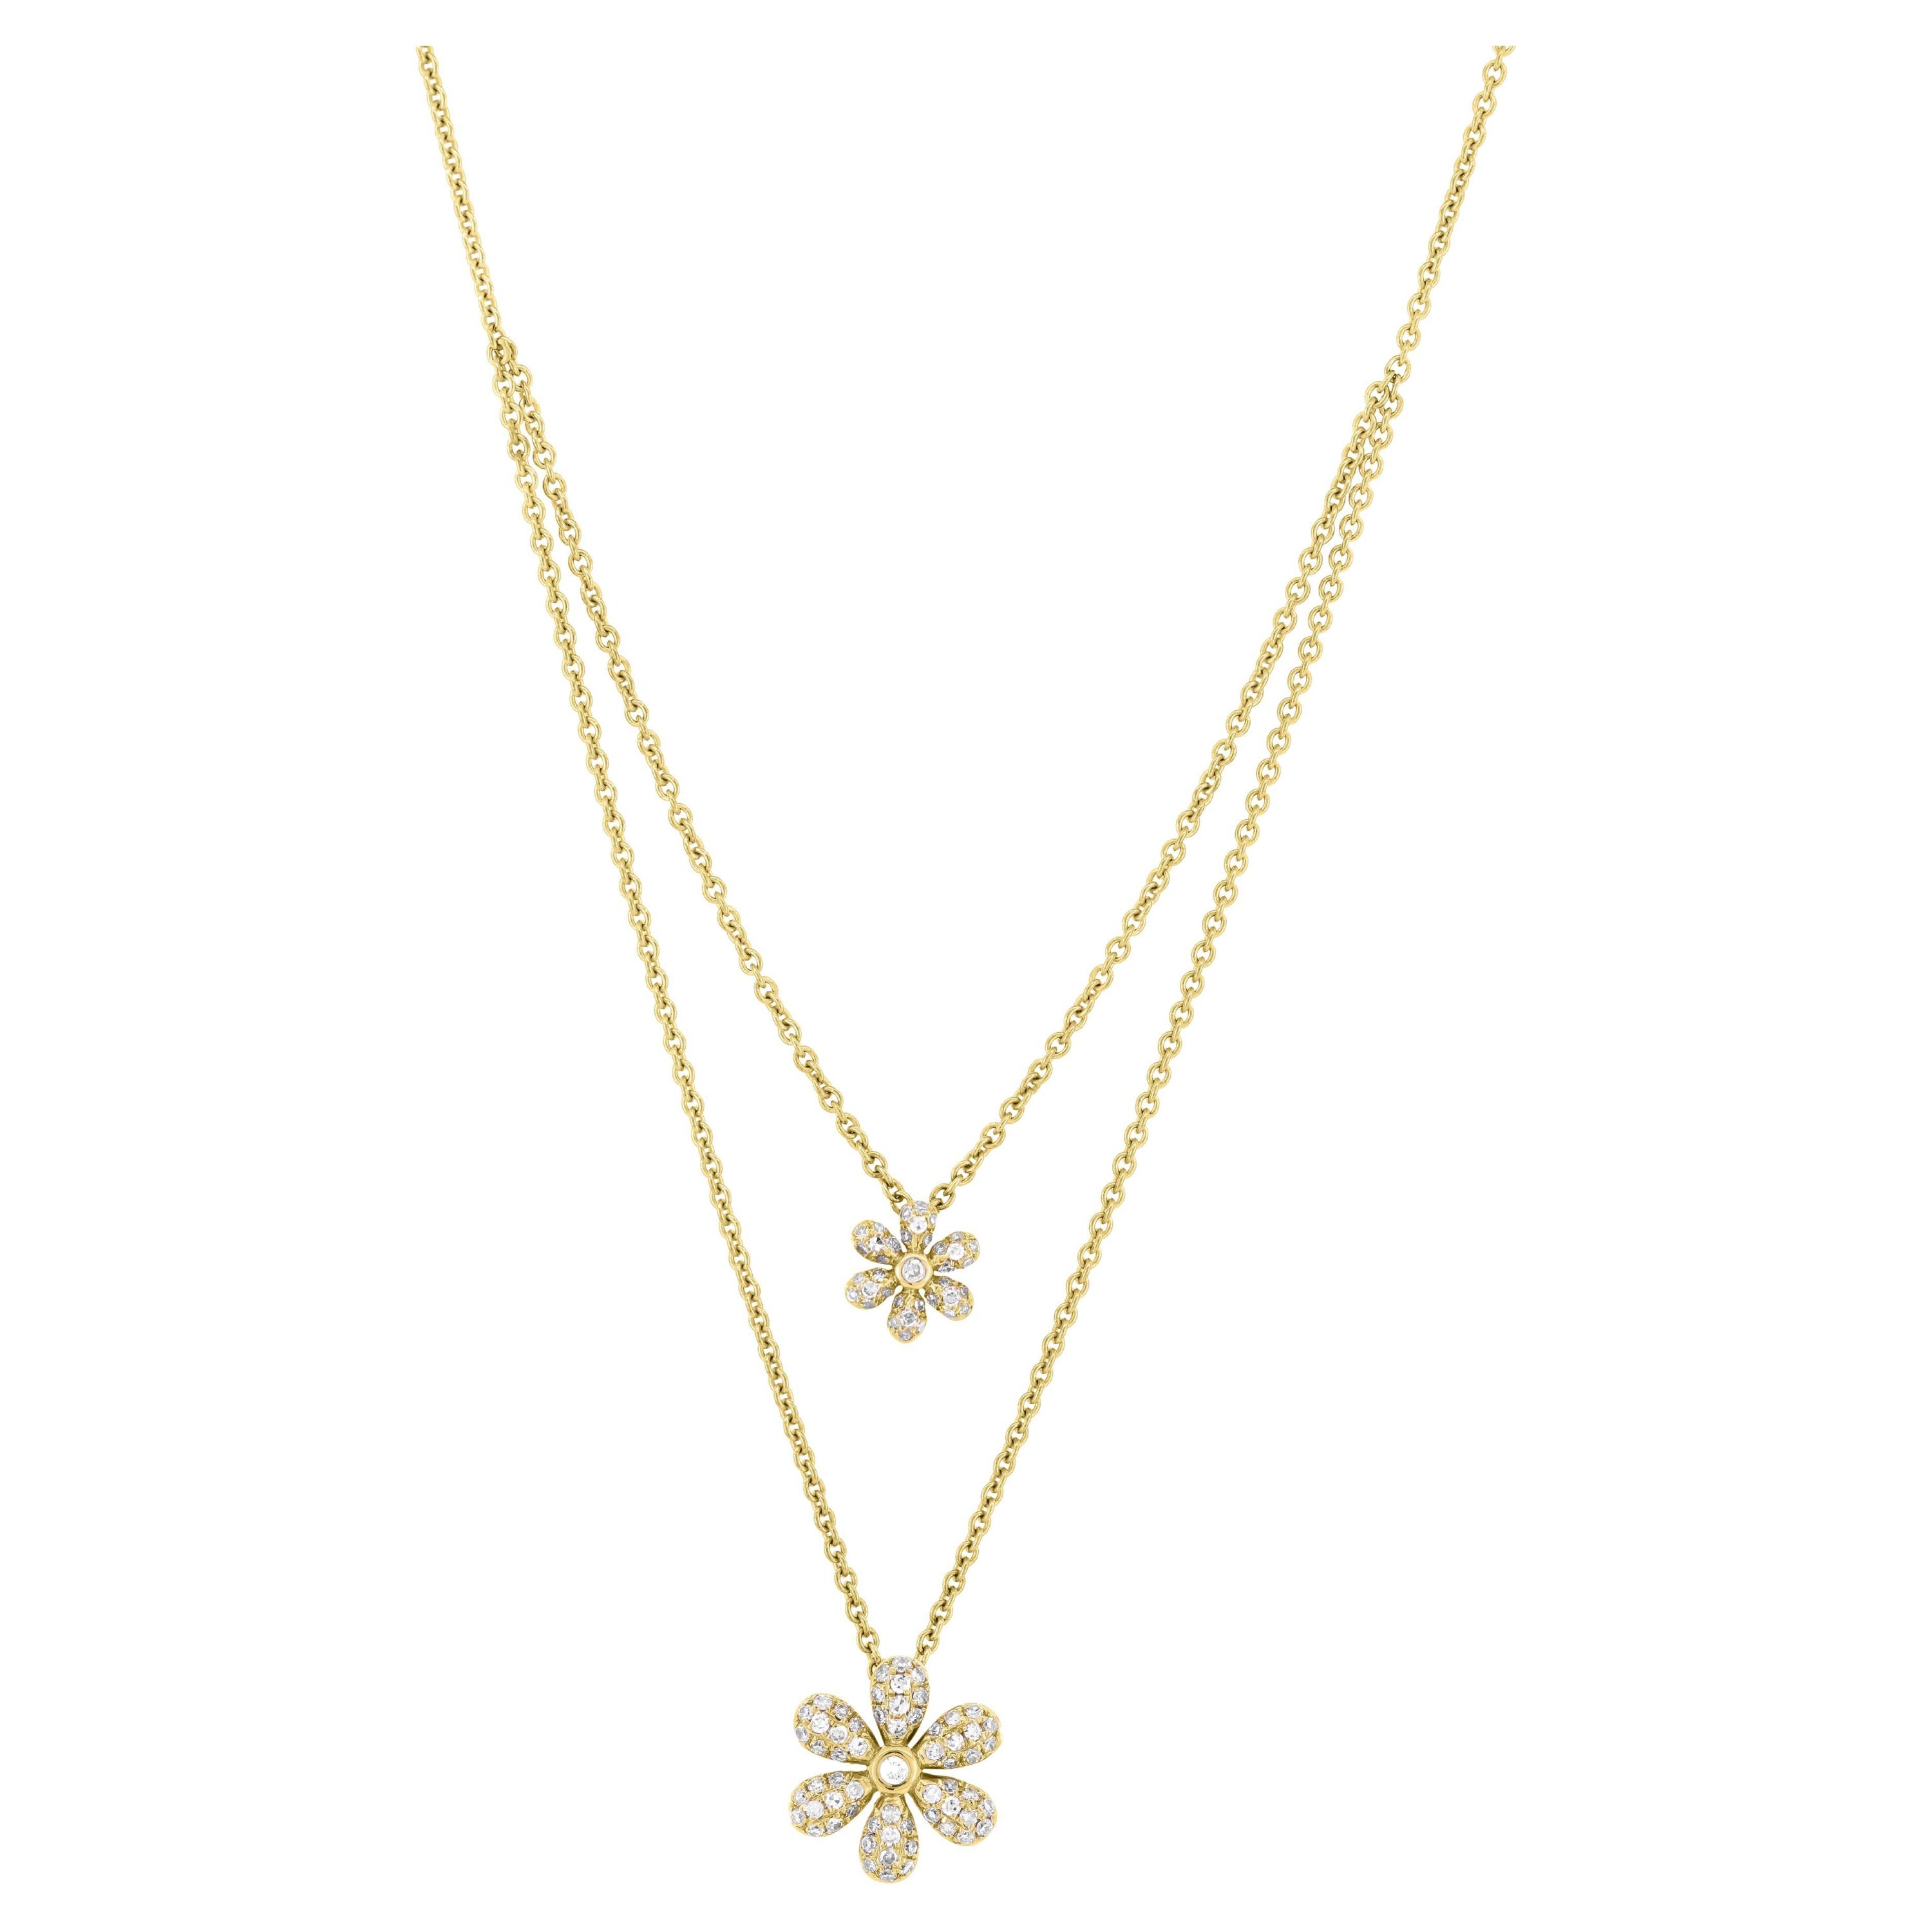 Luxle 0.24cts Diamond Double Strand Flower Pendant Necklace in 18k Yellow Gold